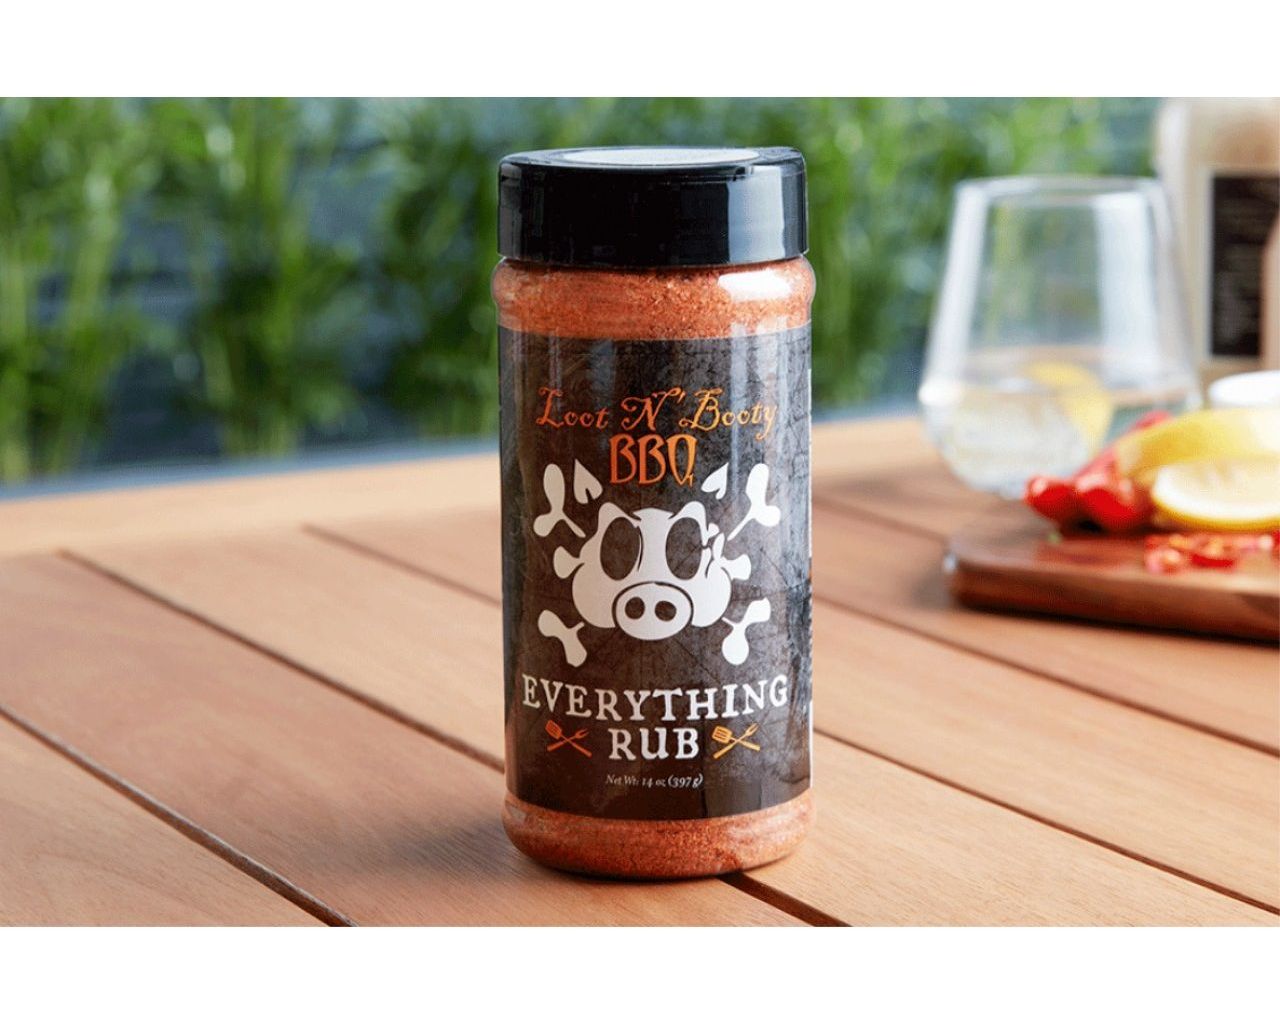 Loot N' Booty Everything - BBQ Rub, , hi-res image number null